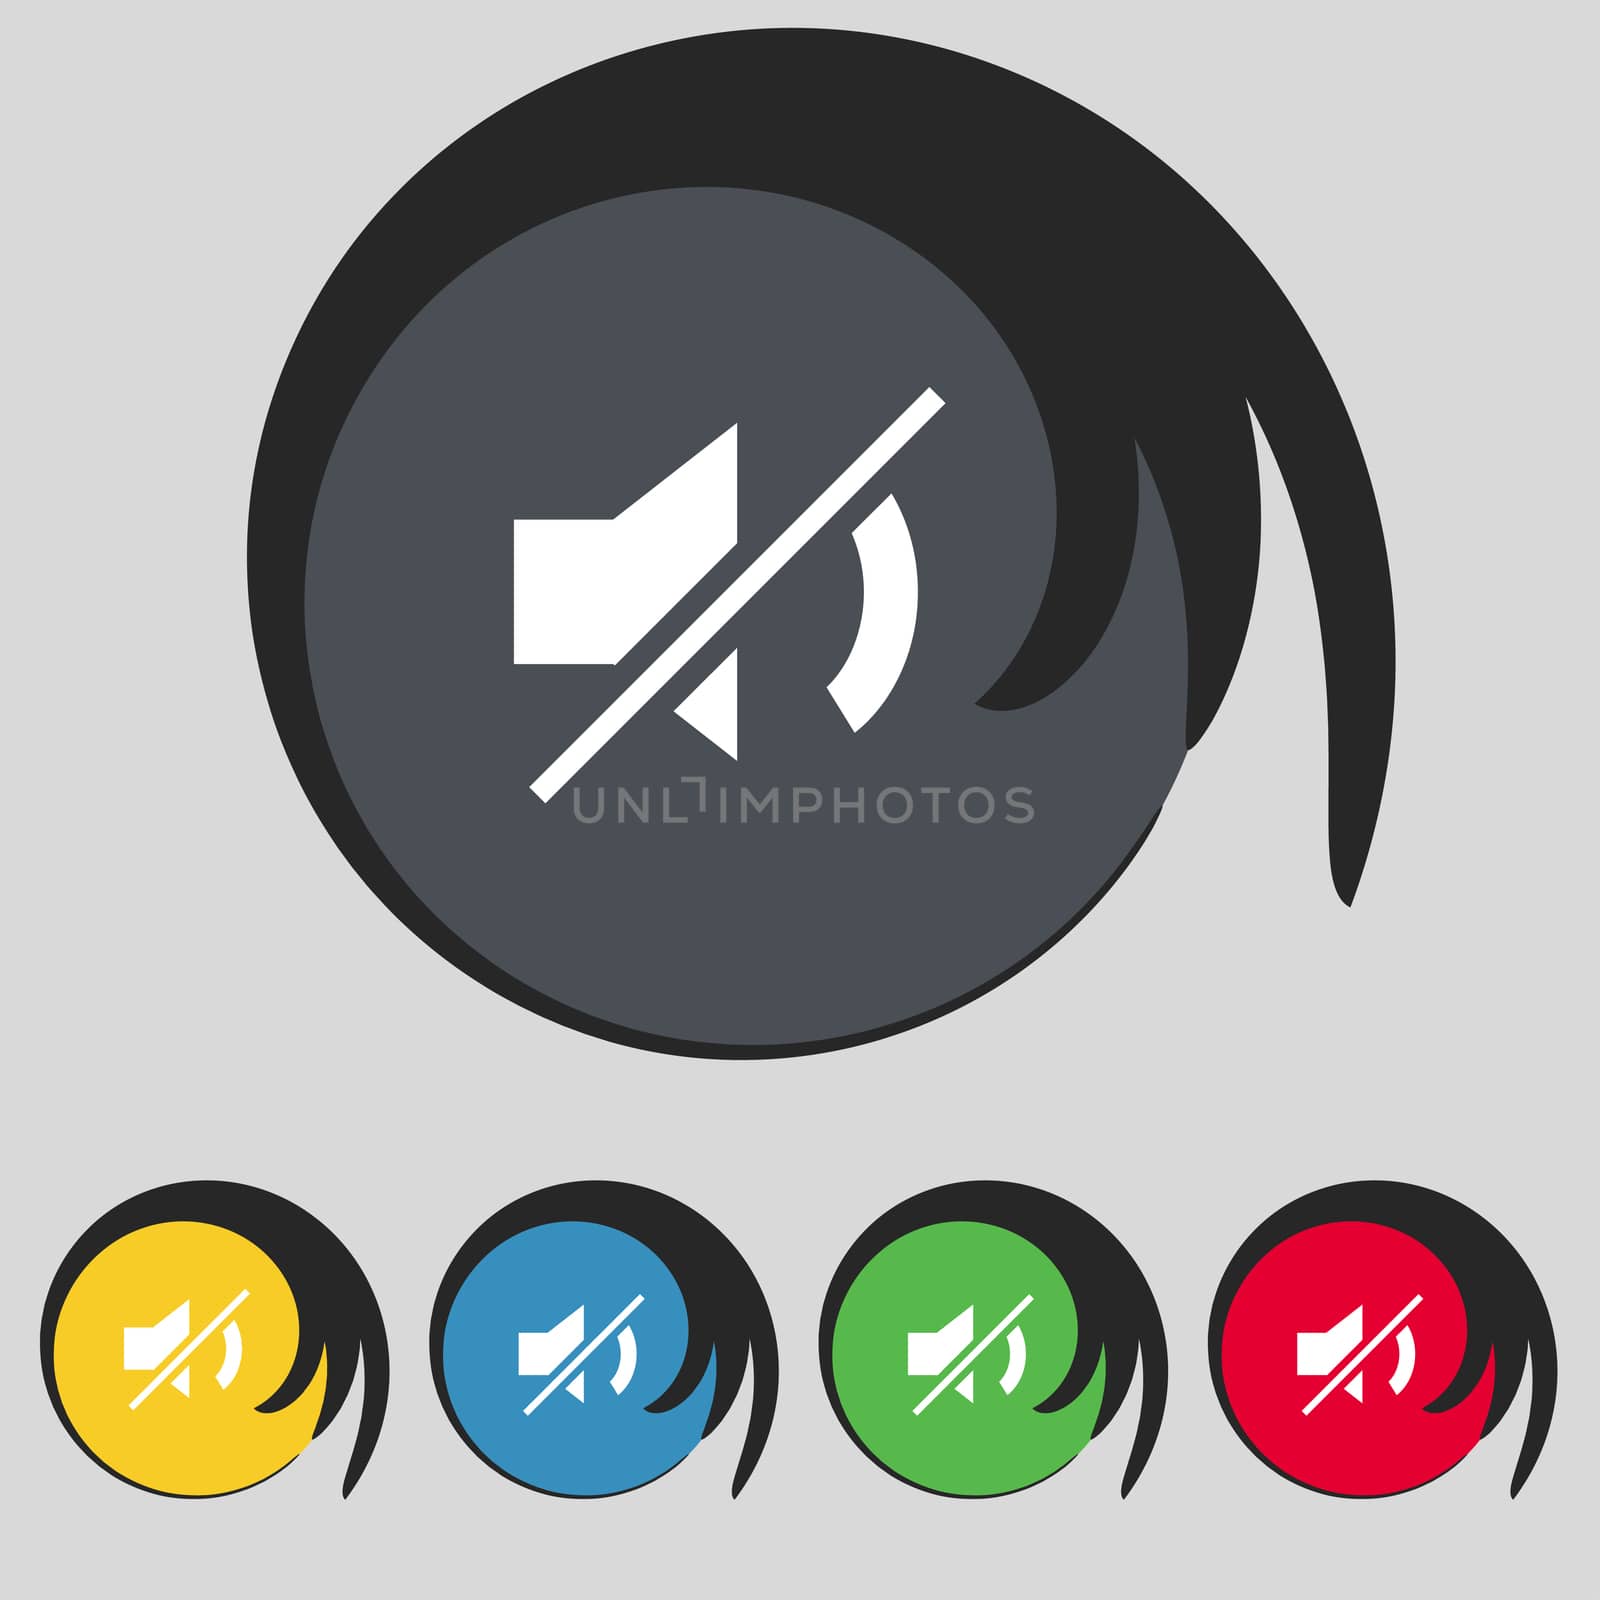 Mute speaker sign icon. Sound symbol. Set colourful buttons. illustration